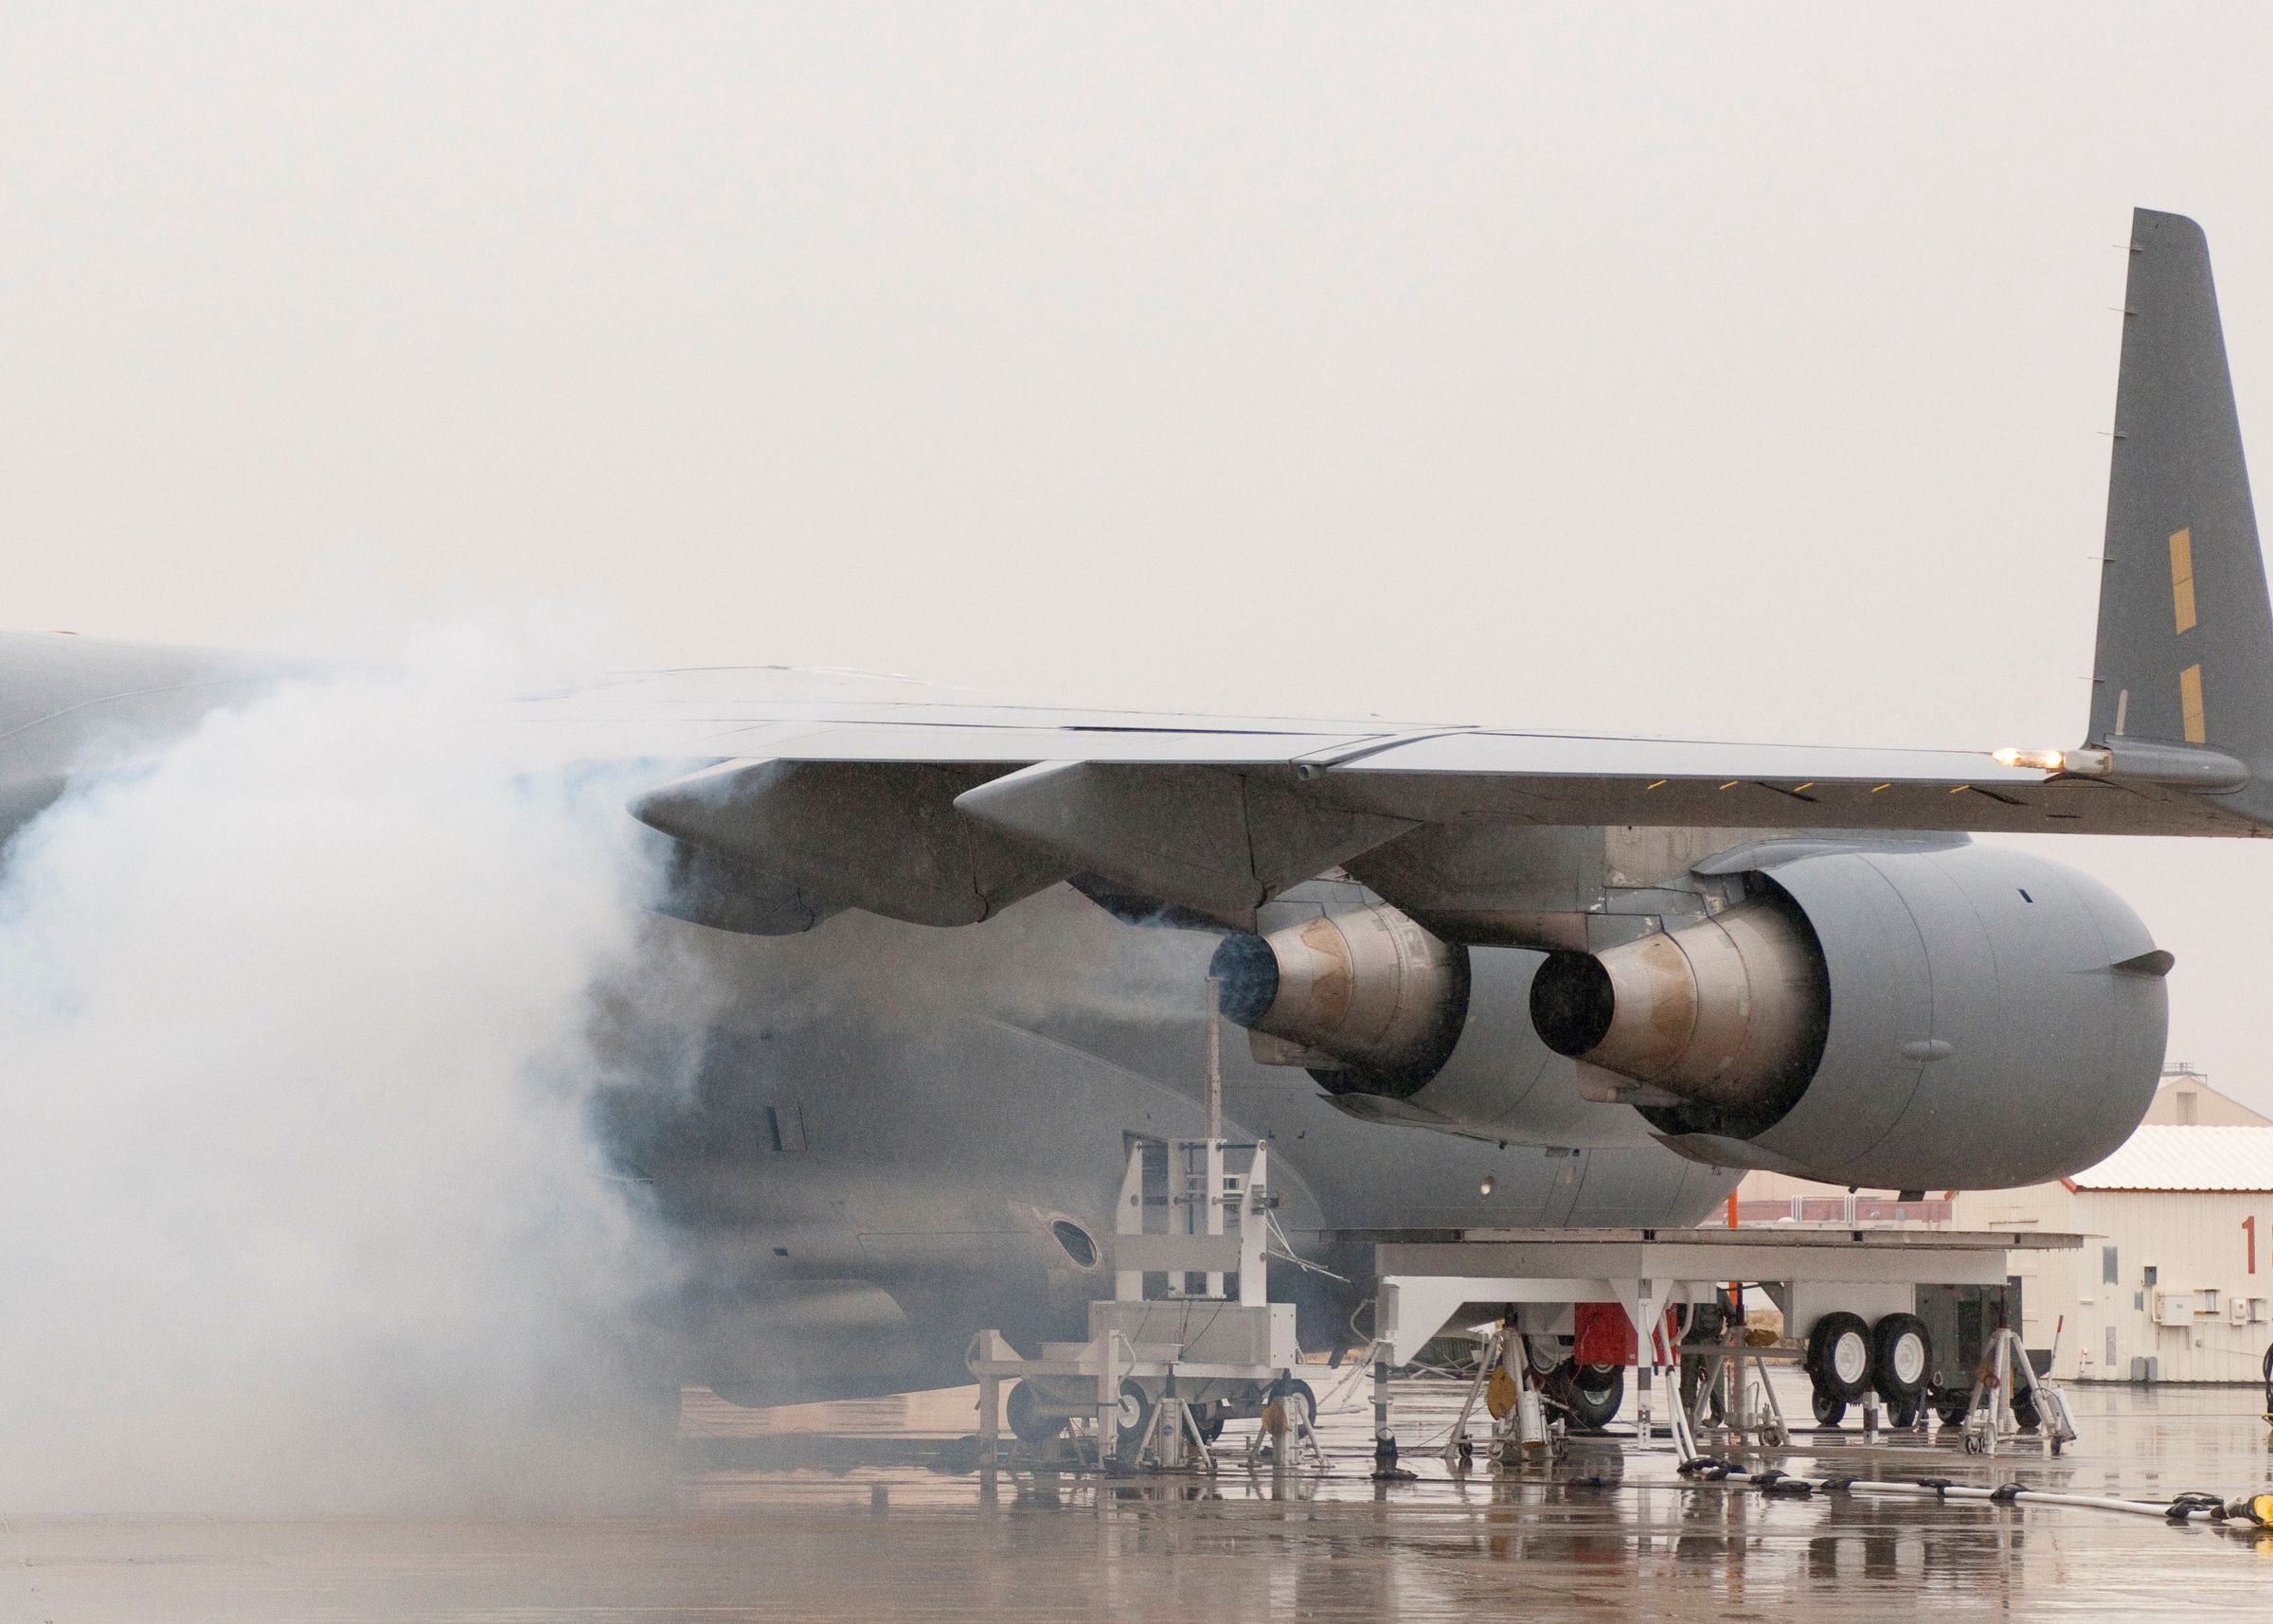 NASA and US Air Force employees blow ash up a C-17 aircraft’s engines to simulate flying through a volcanic ash cloud. The ash was sourced from an ancient volcano in Oregon. 